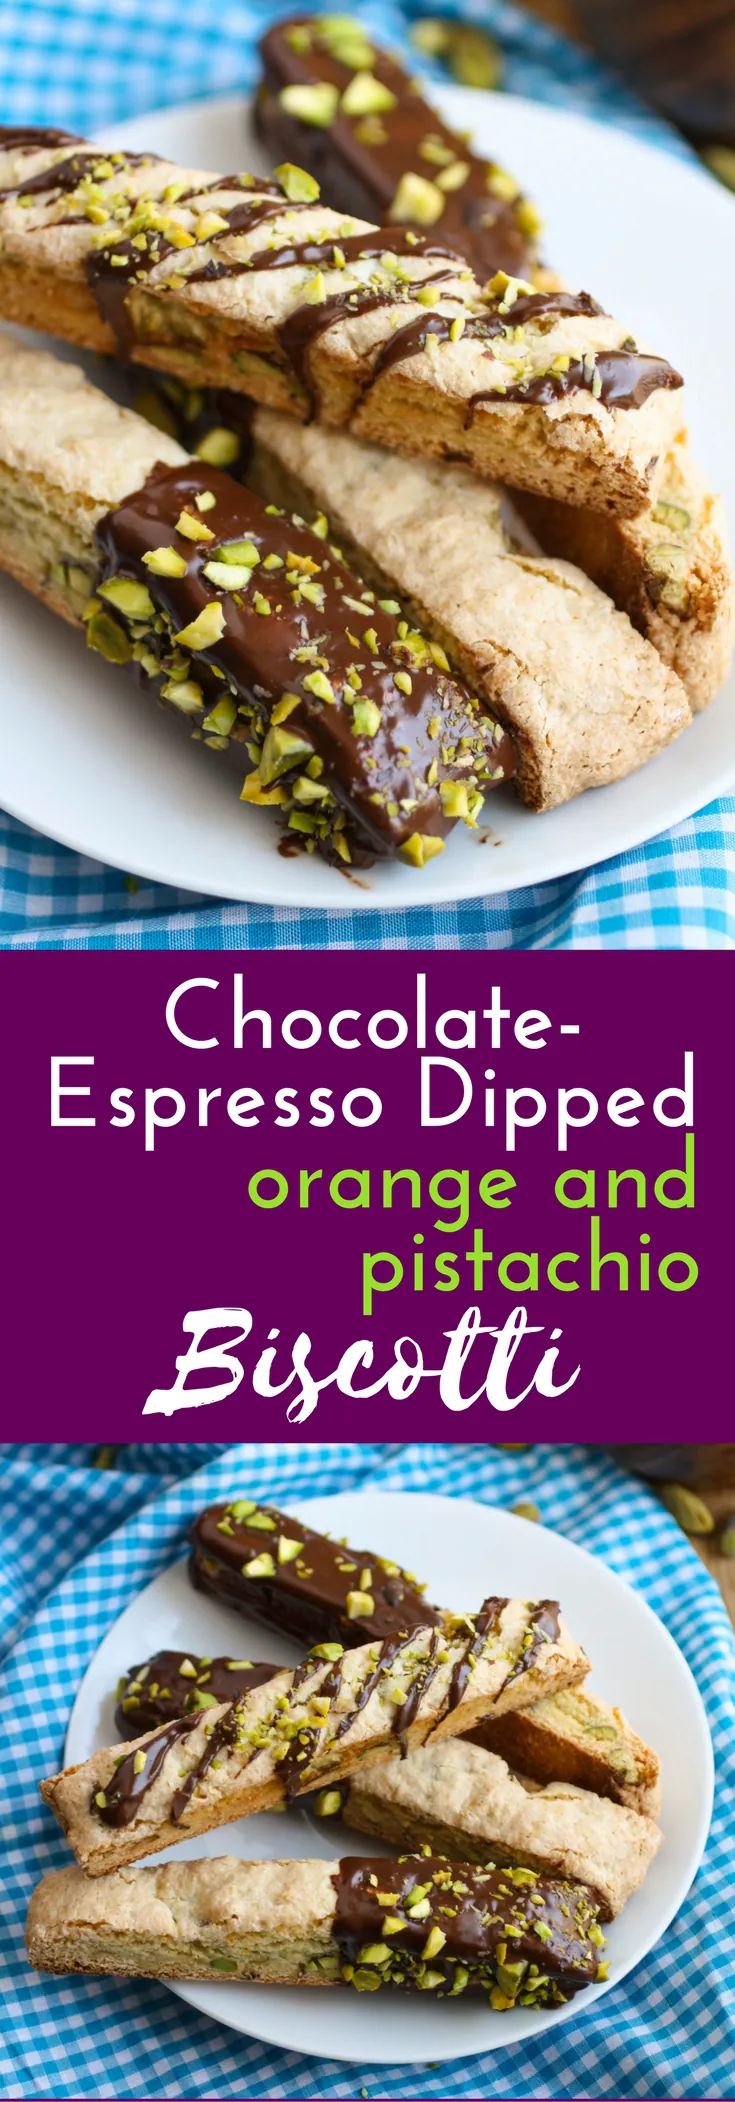 Chocolate-Espresso Dipped Orange and Pistachio Biscotti cookies are a treat. These cookies include fabulous flavors and are good to enjoy anytime!